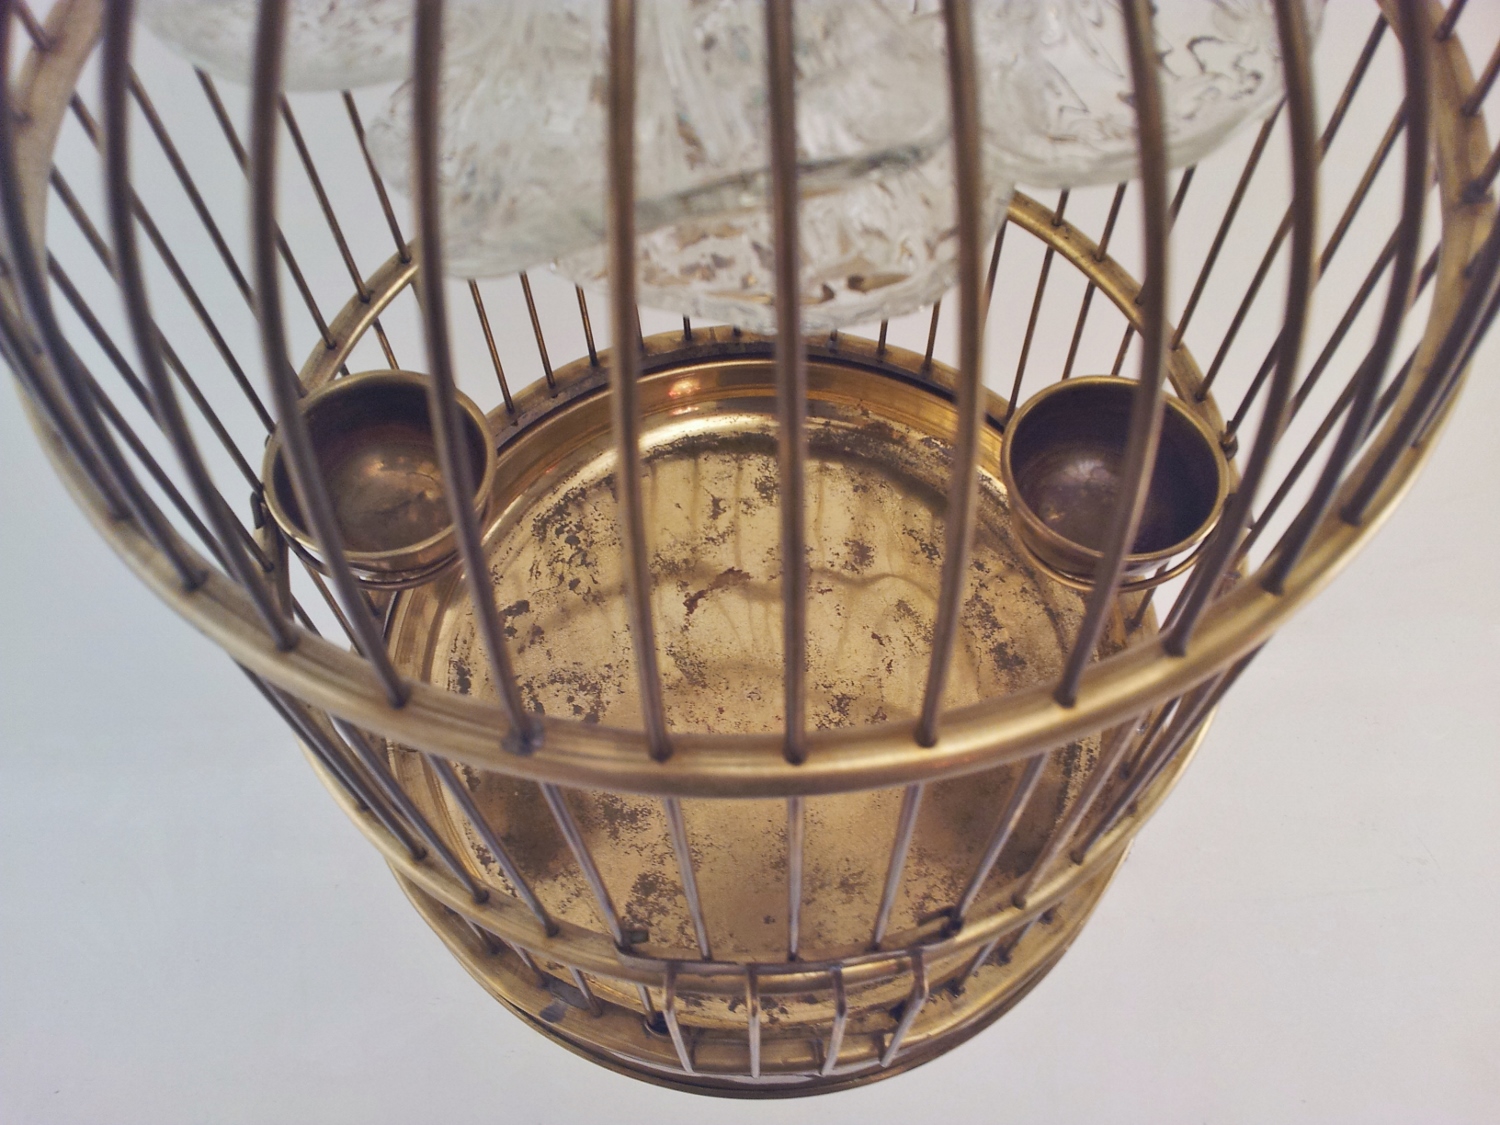 Birdcage antique pendant light brass & glass, 1900`s ca, French in Antique  & Vintage Chandeliers from Roomscape